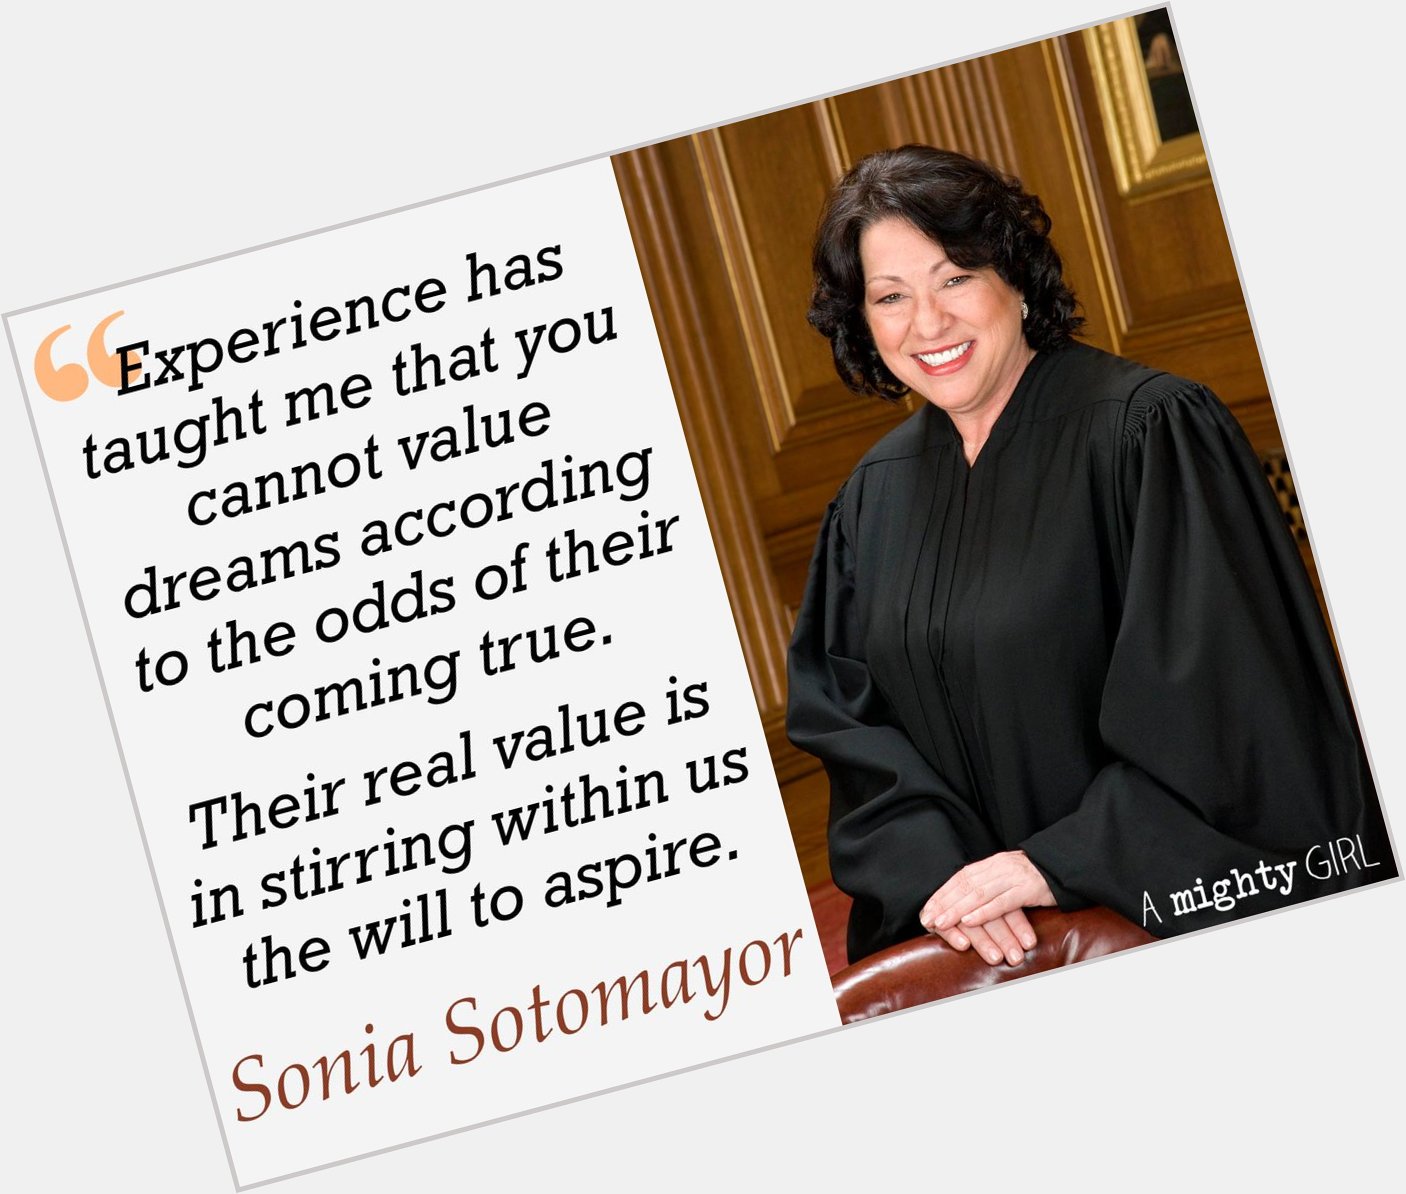 A Mighty Girl wishes US Supreme Court Justice Sonia Sotomayor a happy birthday!  